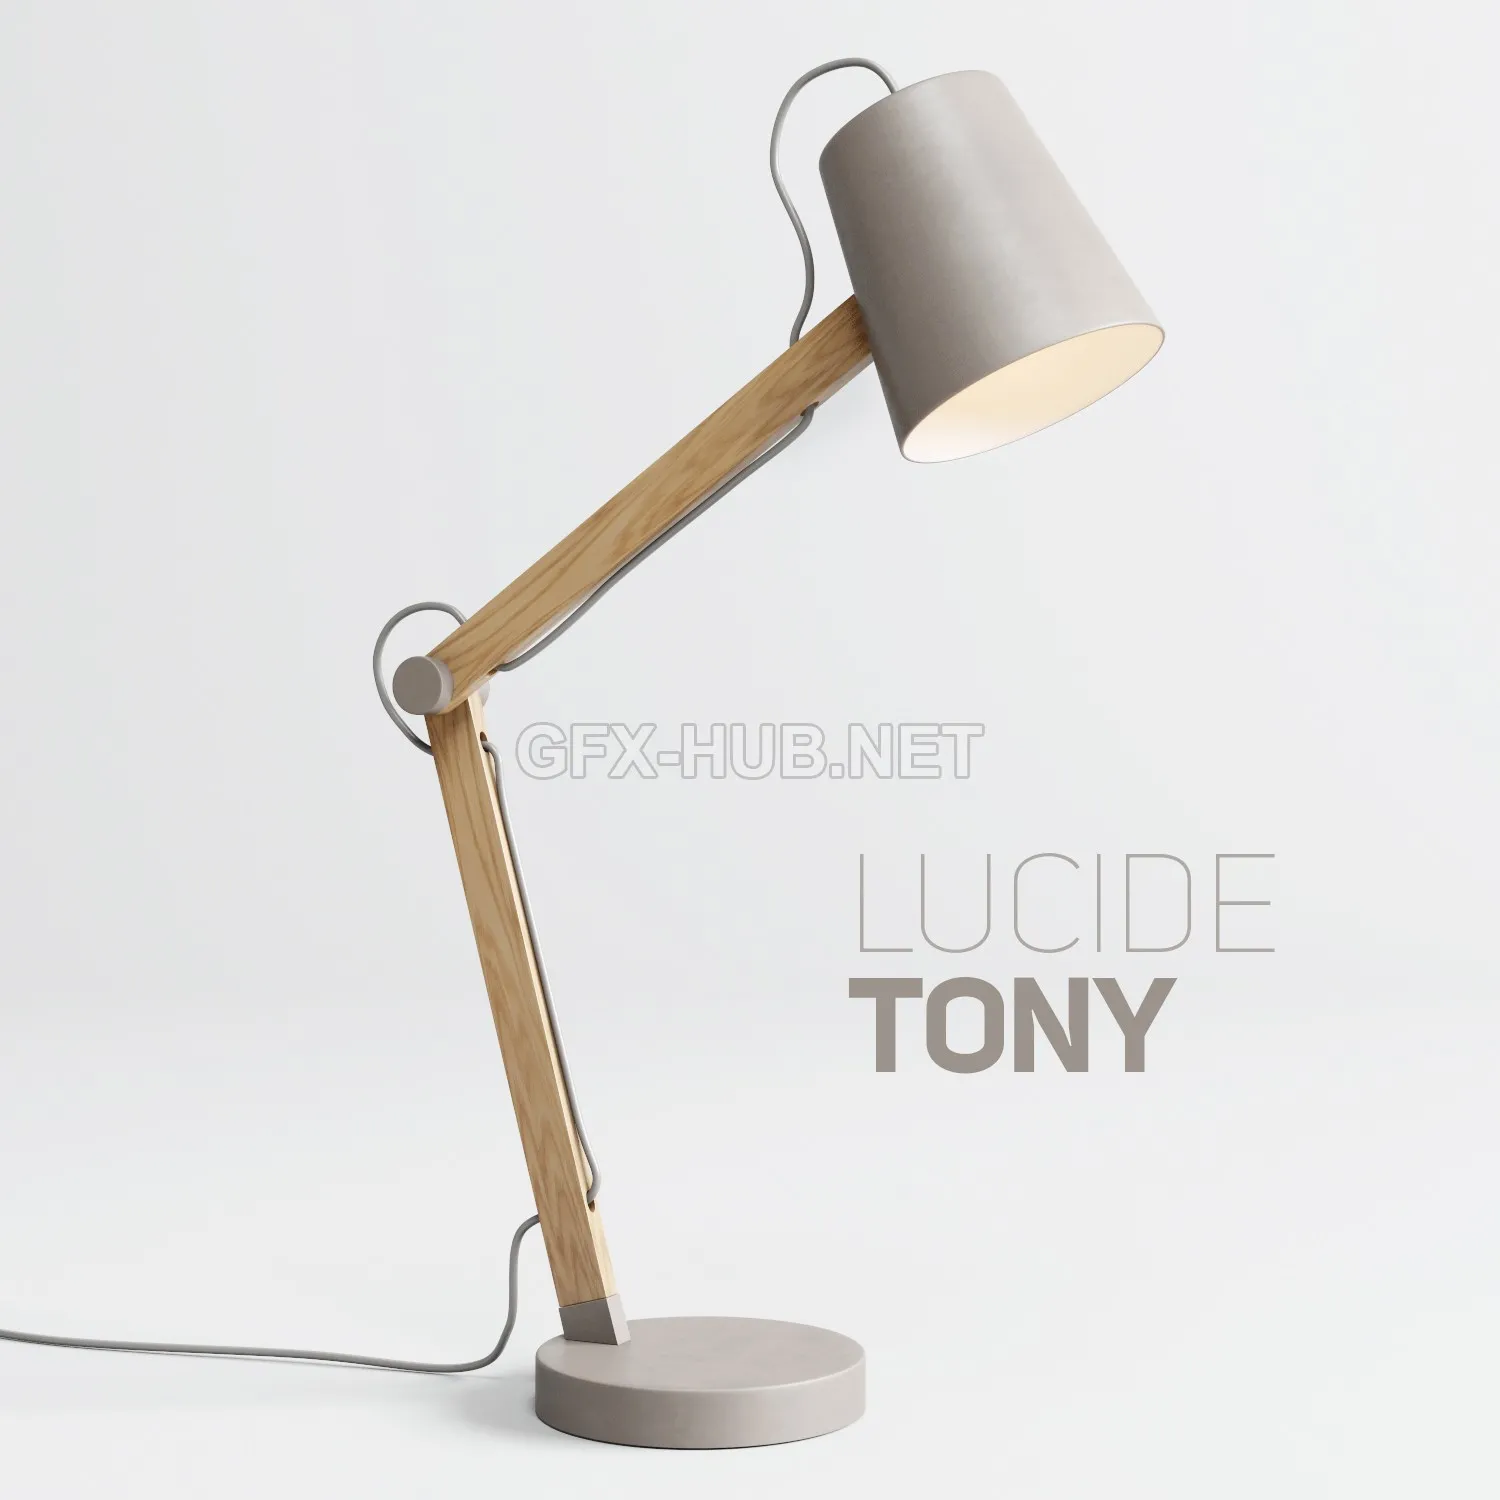 Table lamp LUCIDE TONY – 6450